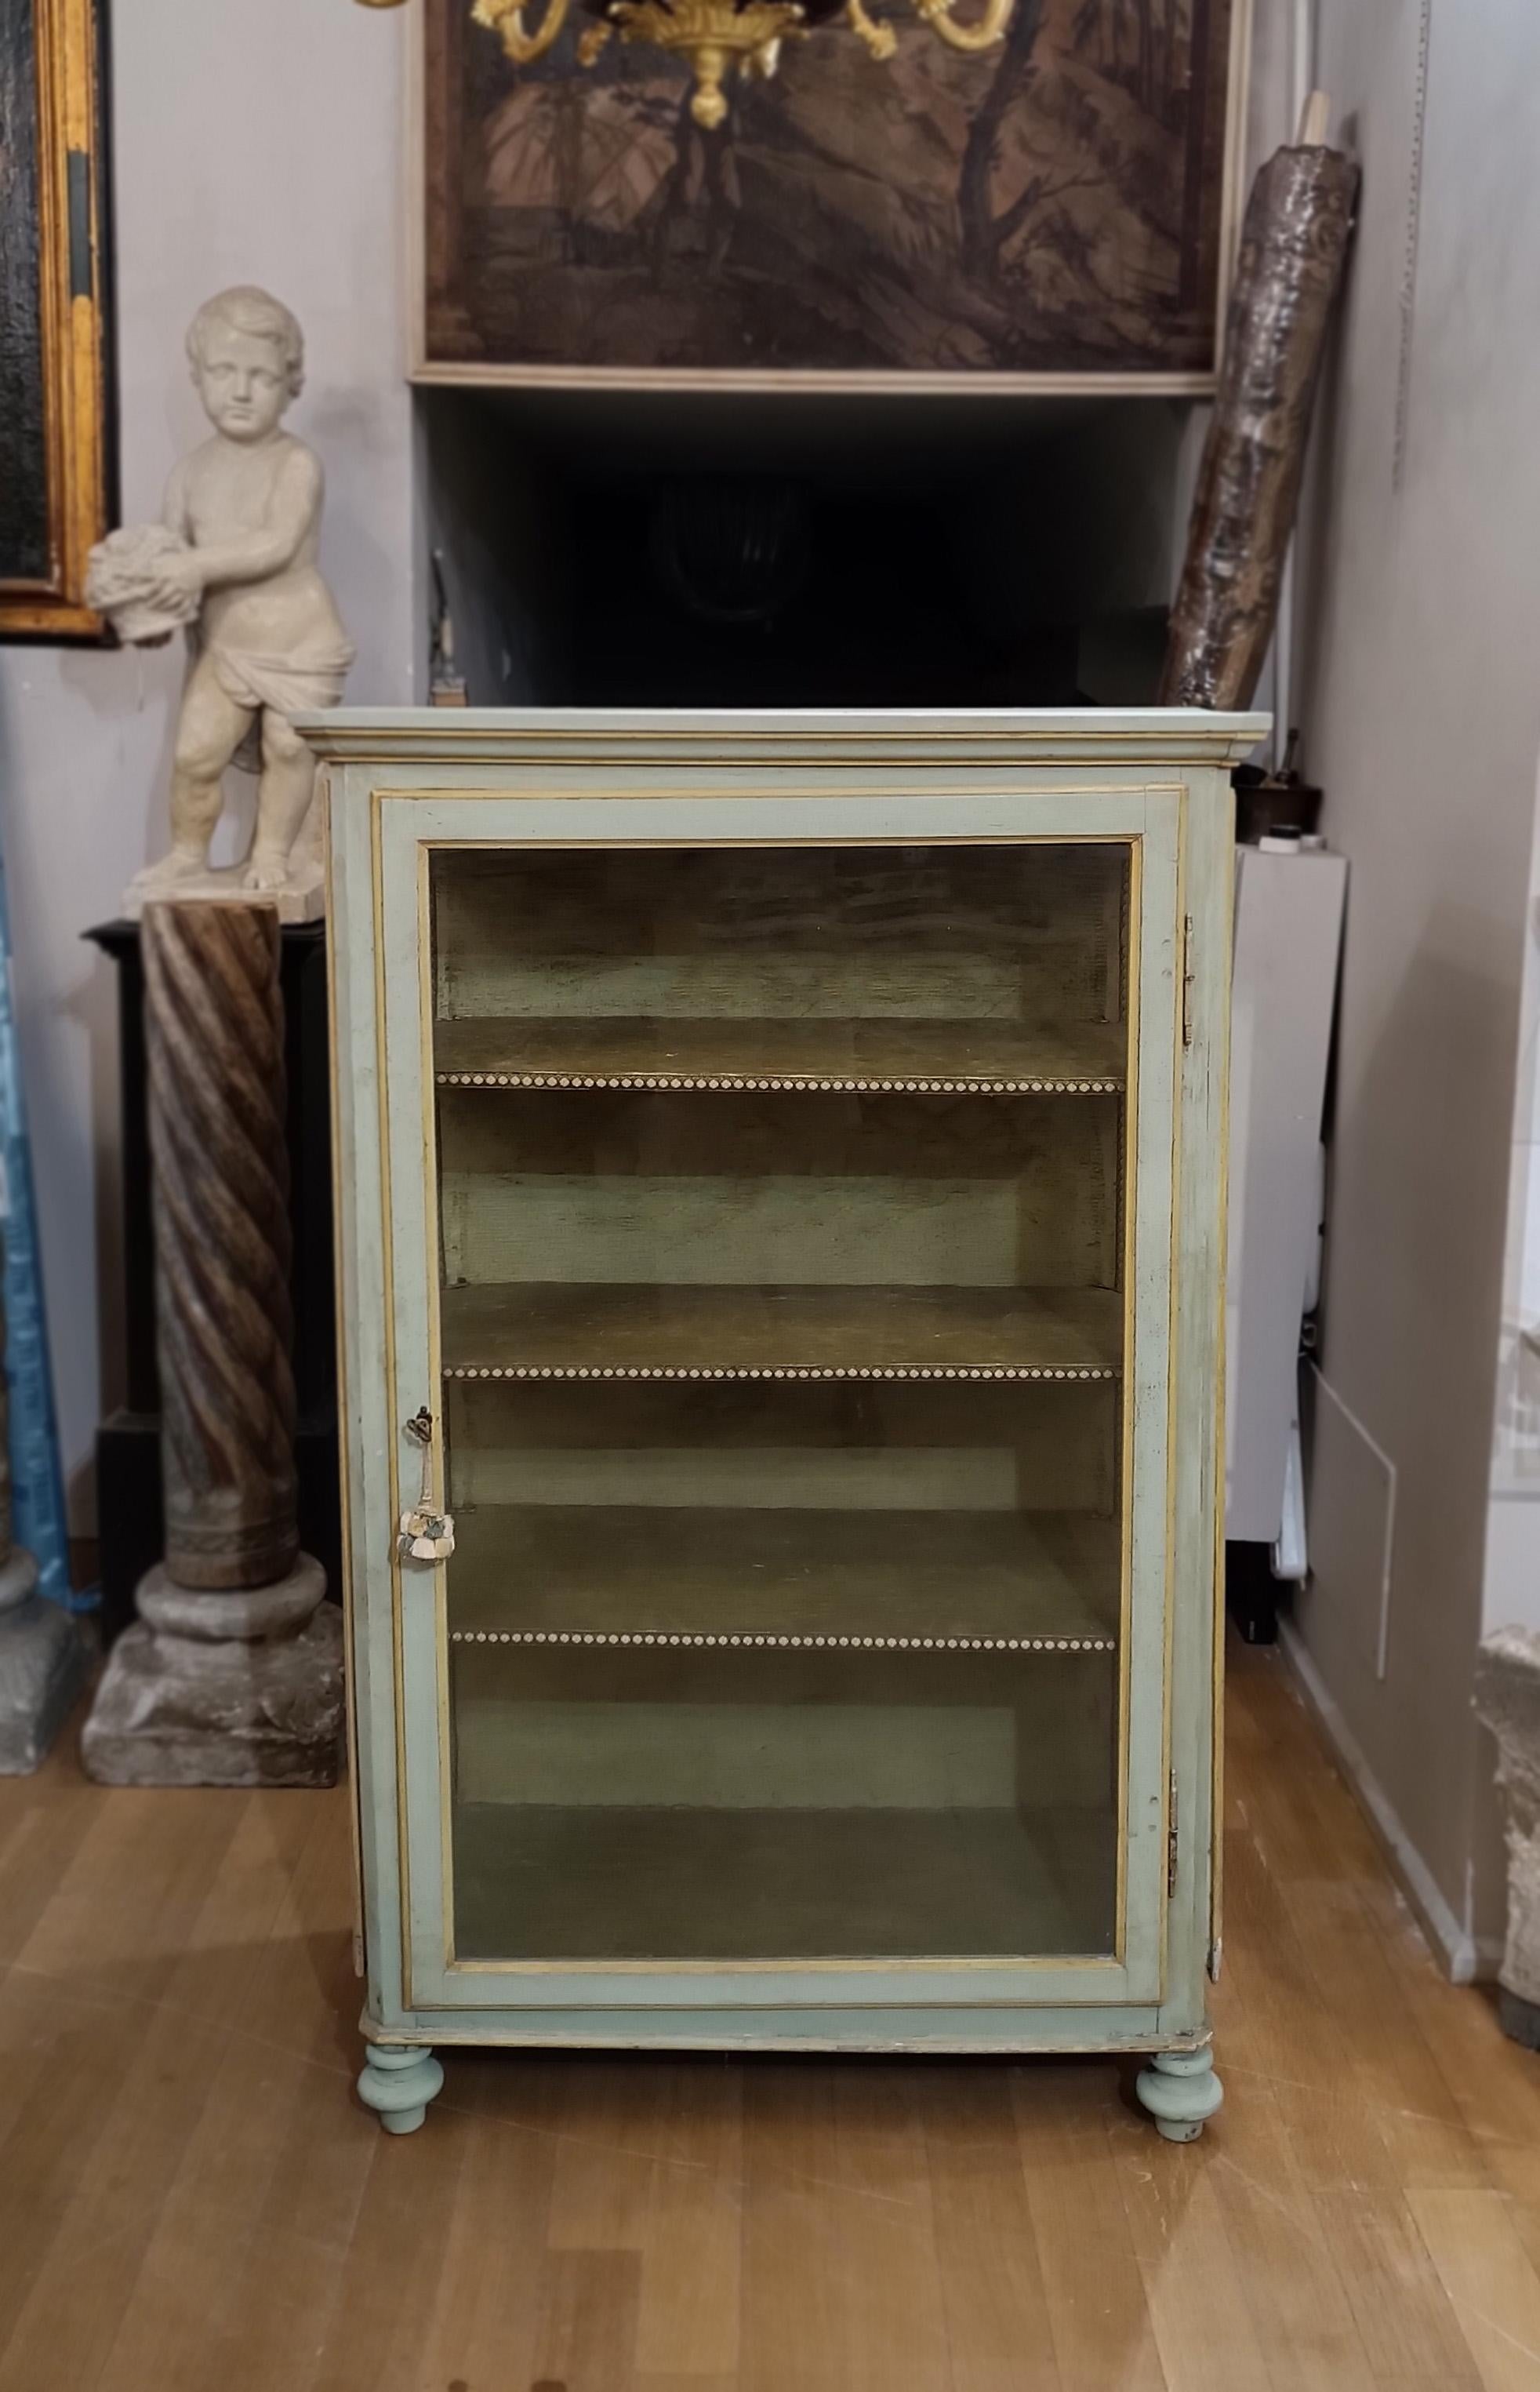 Beautiful display cabinet in poplar wood painted with lean tempera in a striking green and yellow duotone. Its authentic beauty is enhanced by the original glass, which also extends to the sides, allowing a complete view of the objects on display.